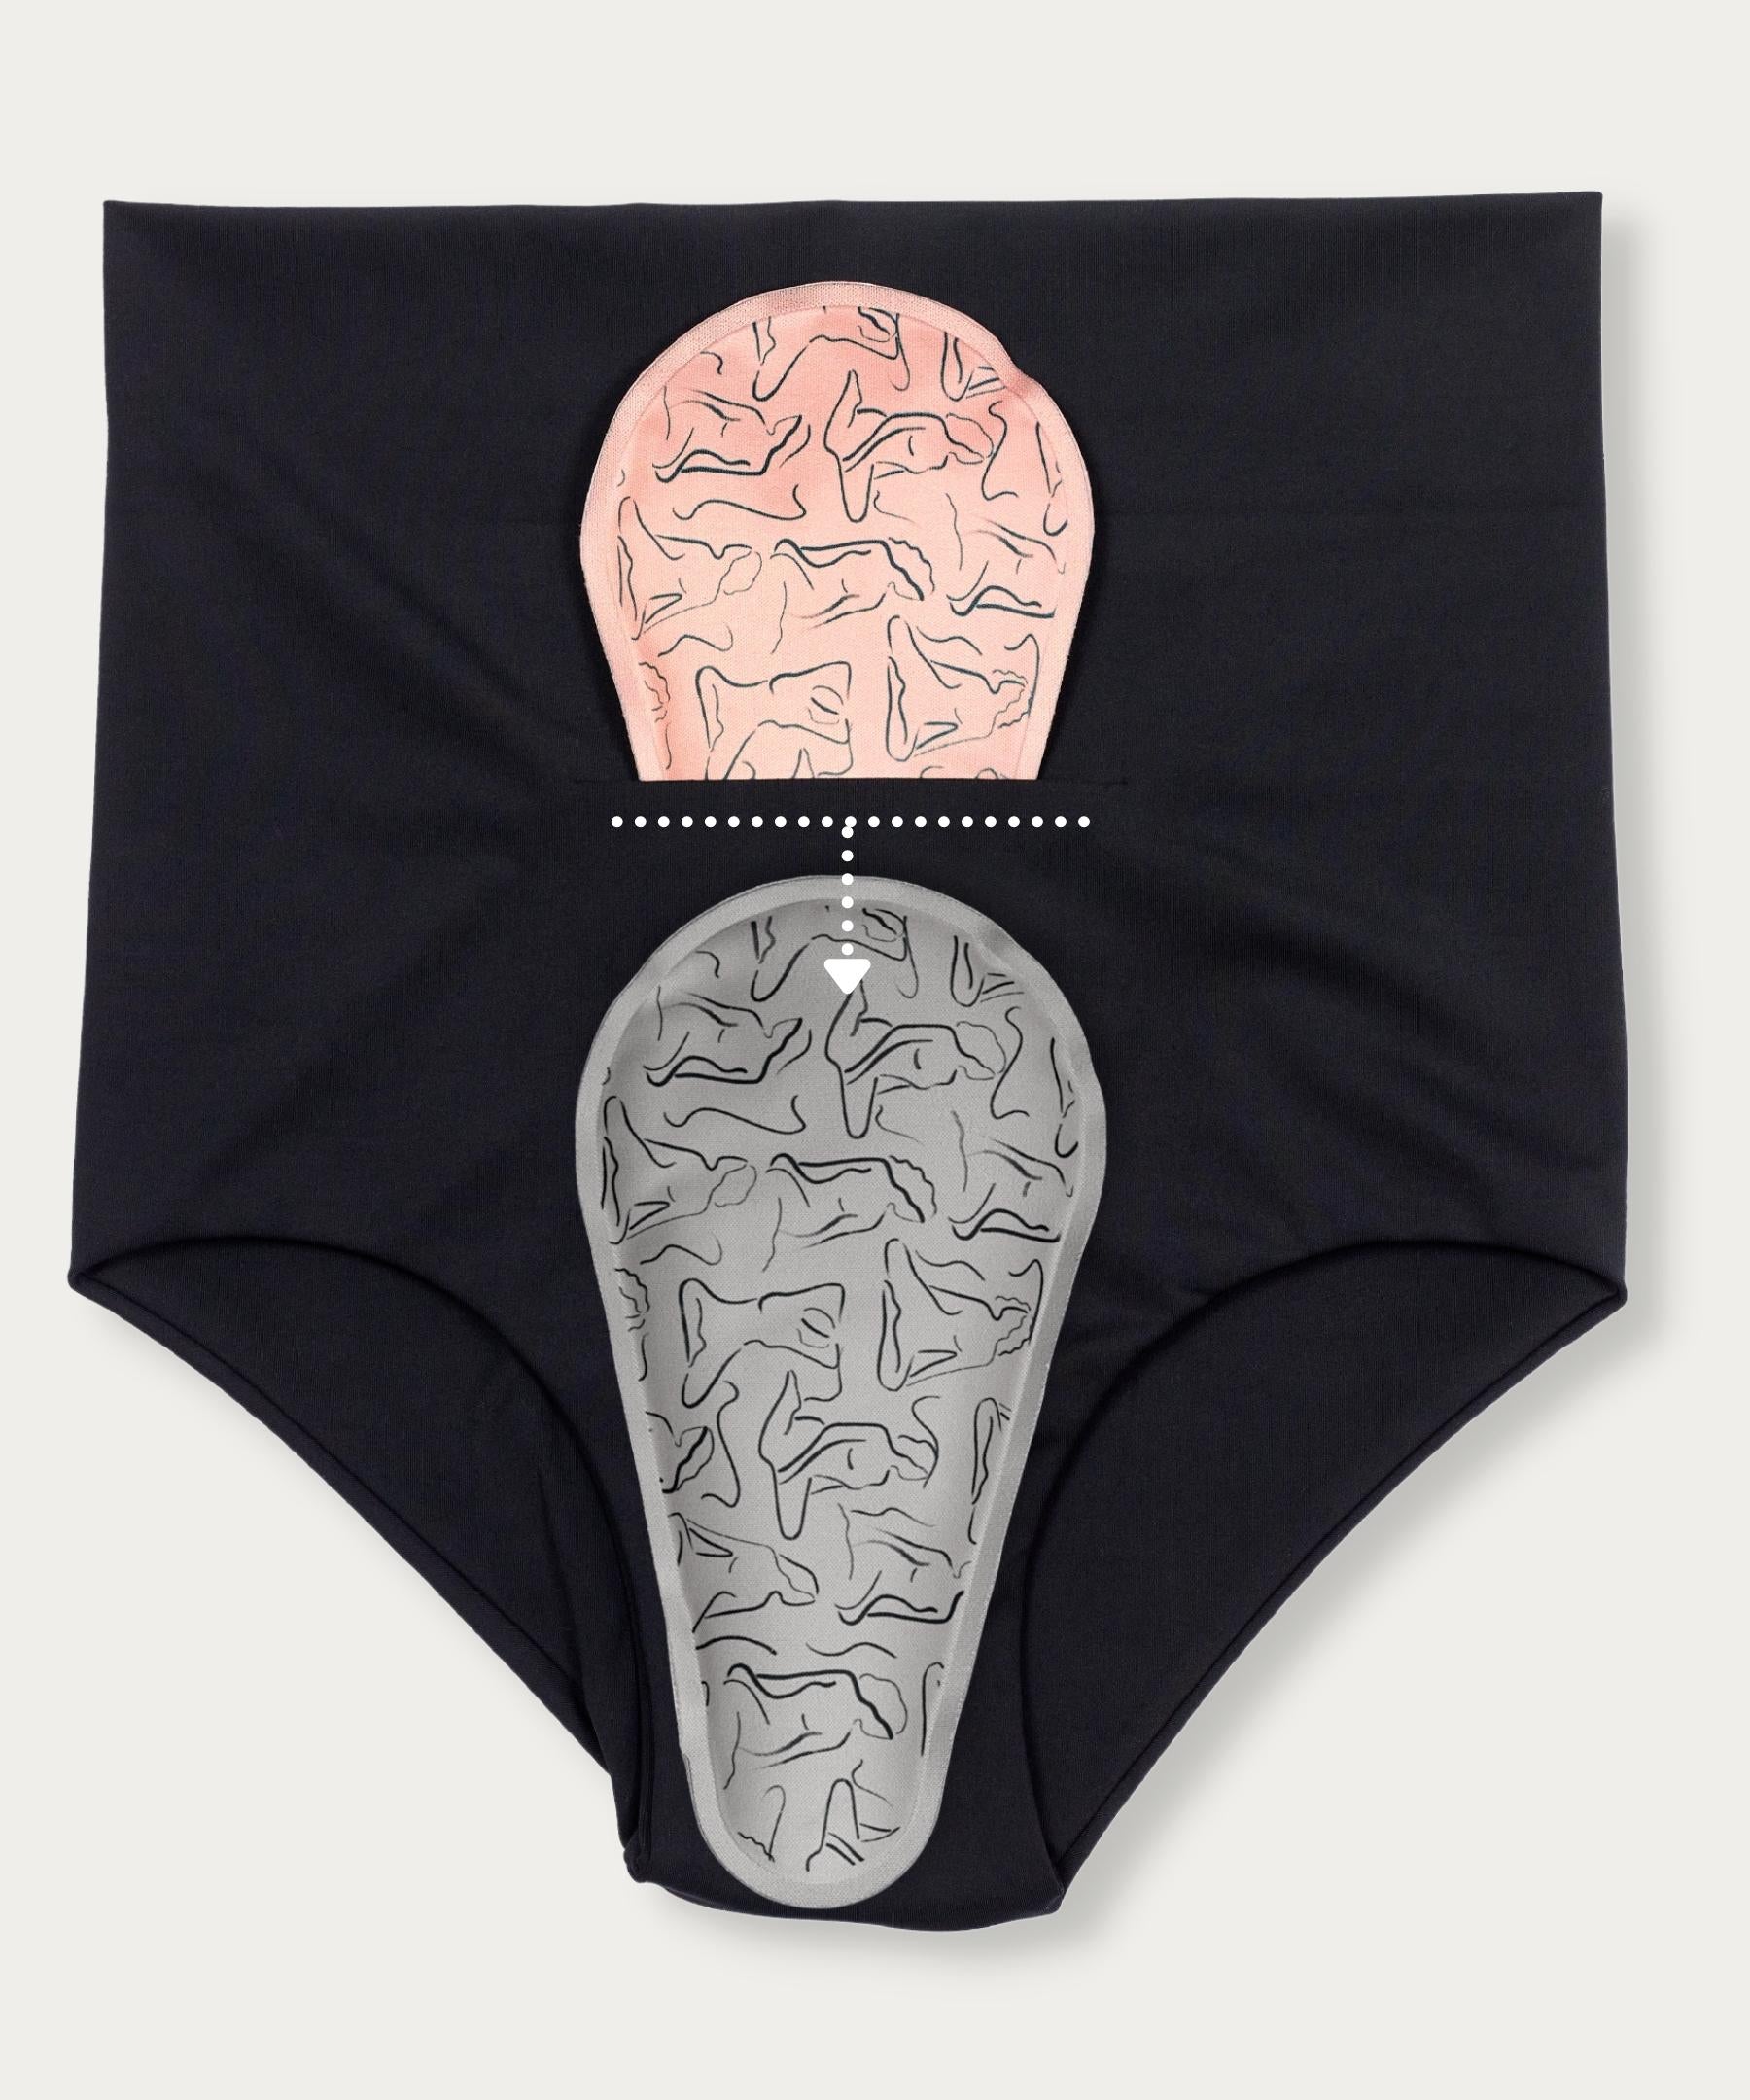 FourthWear Postpartum Recovery Underwear diagrammed to show potential placement of ice/heat packs